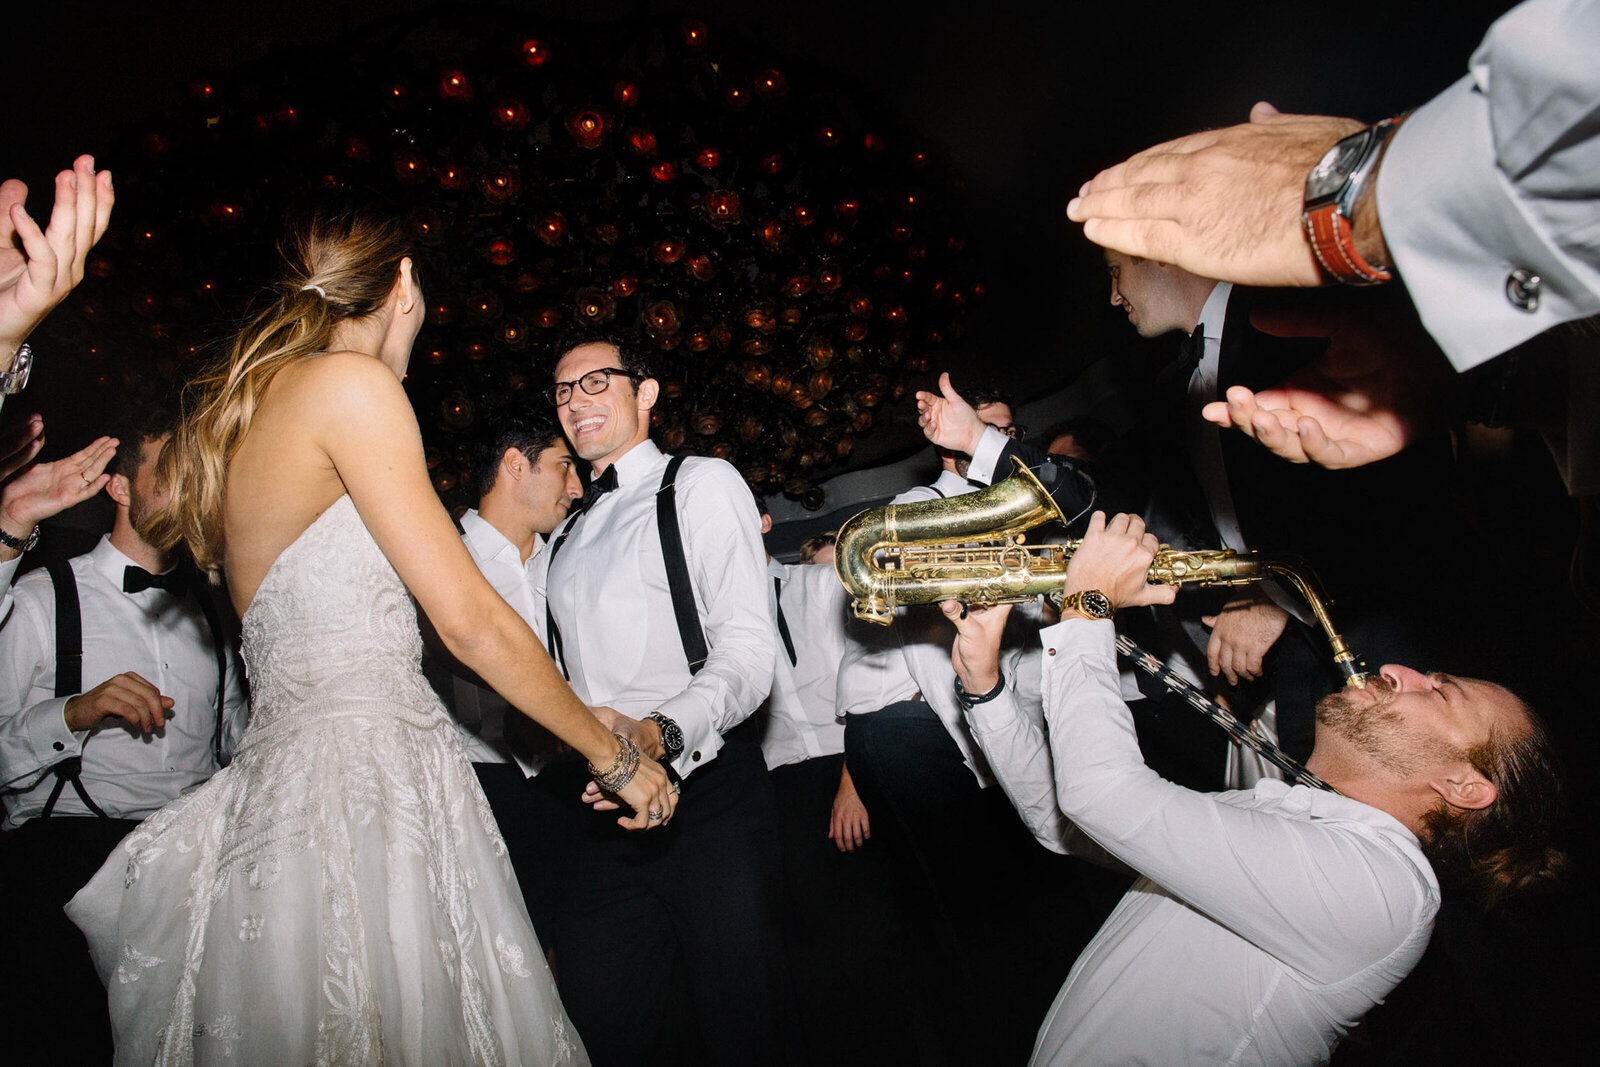 058-For-the-Love-of-It-Wedding-Saxaphone-Band-West-Coast-Music